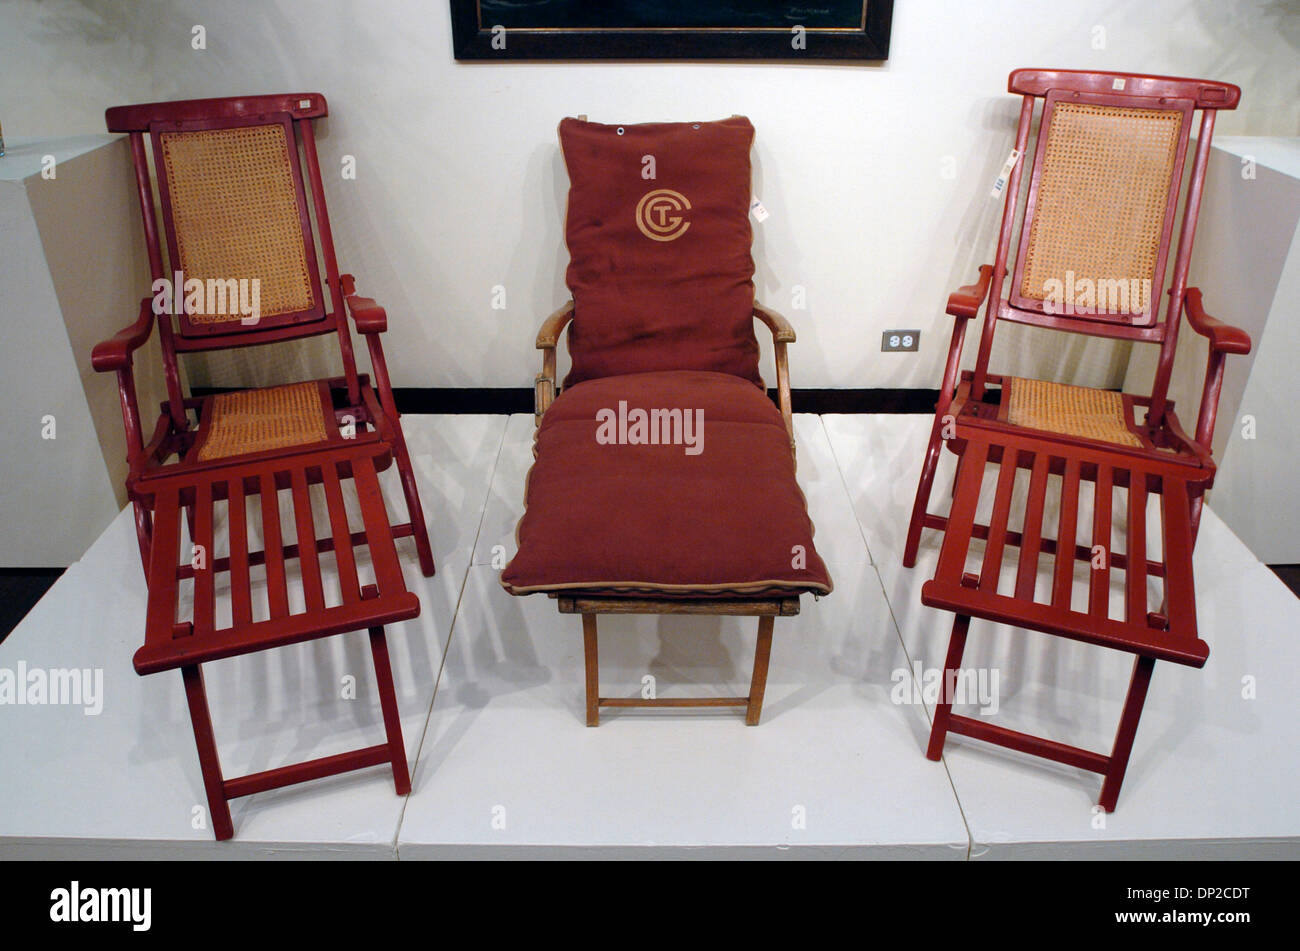 May 26, 2006; Manhattan, NY, USA; A pair of deck chairs from the S.S. Normandie, estimated to sell for U.S. $6,000-8,000 flank a deck chair from the French Line (C), estimated to sell for U.S. $2,500-3,500. Christie's New York 2006 'Ocean Liner Furnishings And Art' sale features two name boards and a house flag from Titanic life boats used during the 1912 sinking of the ocean liner Stock Photo